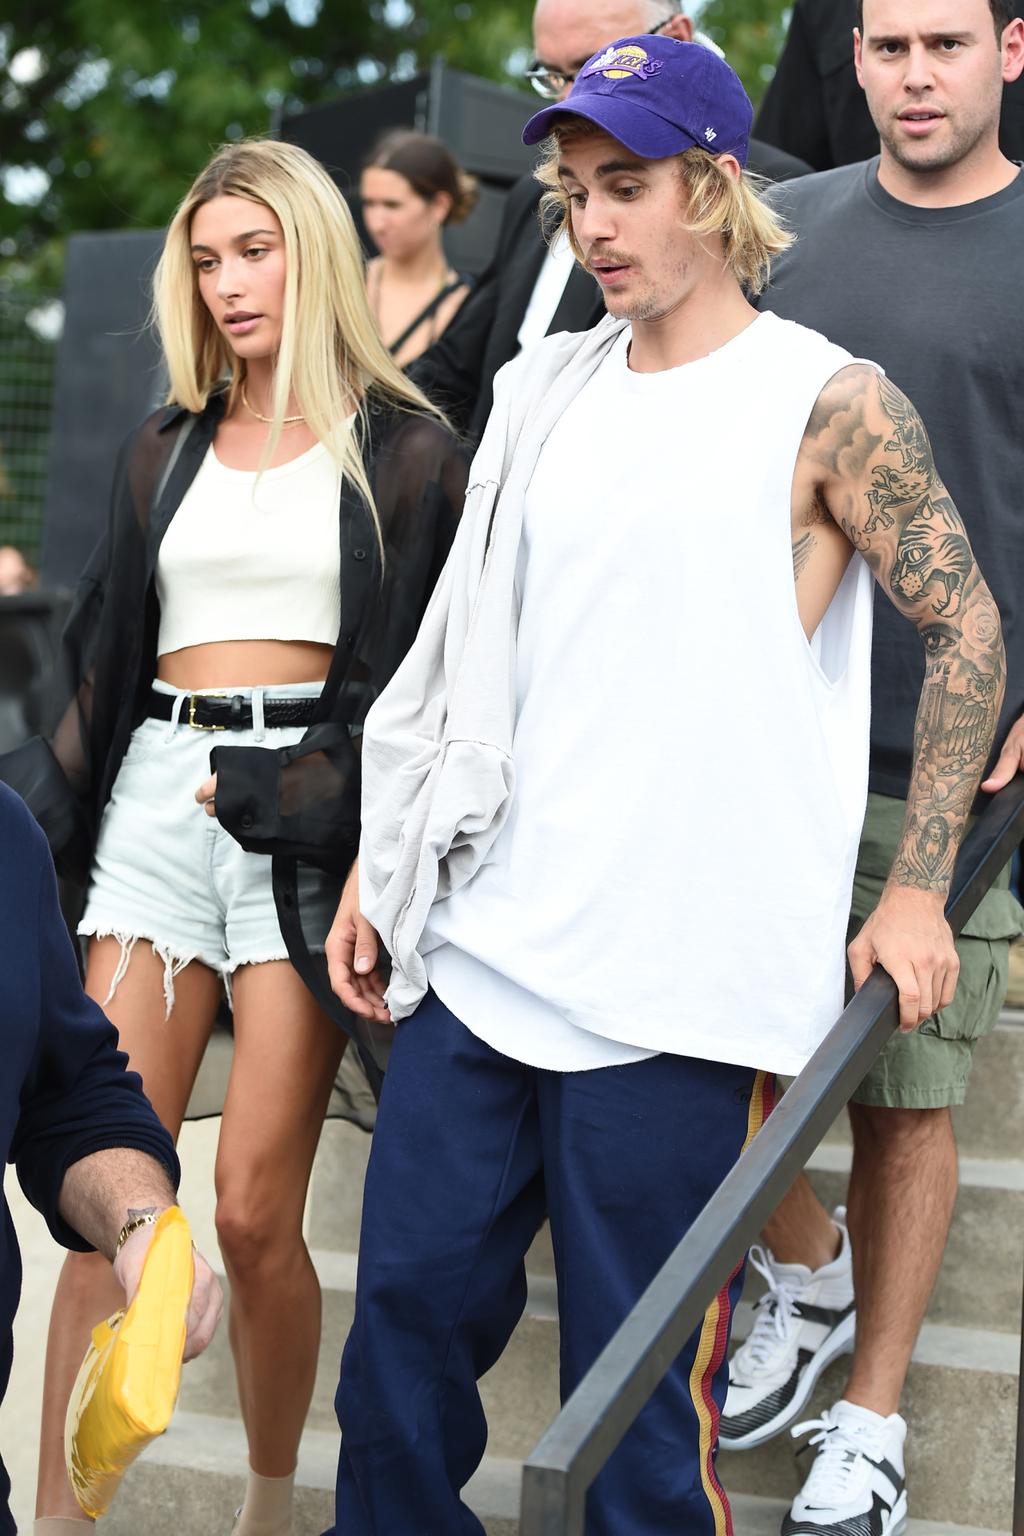 Justin Bieber And Hailey Baldwin Are Definitely Getting